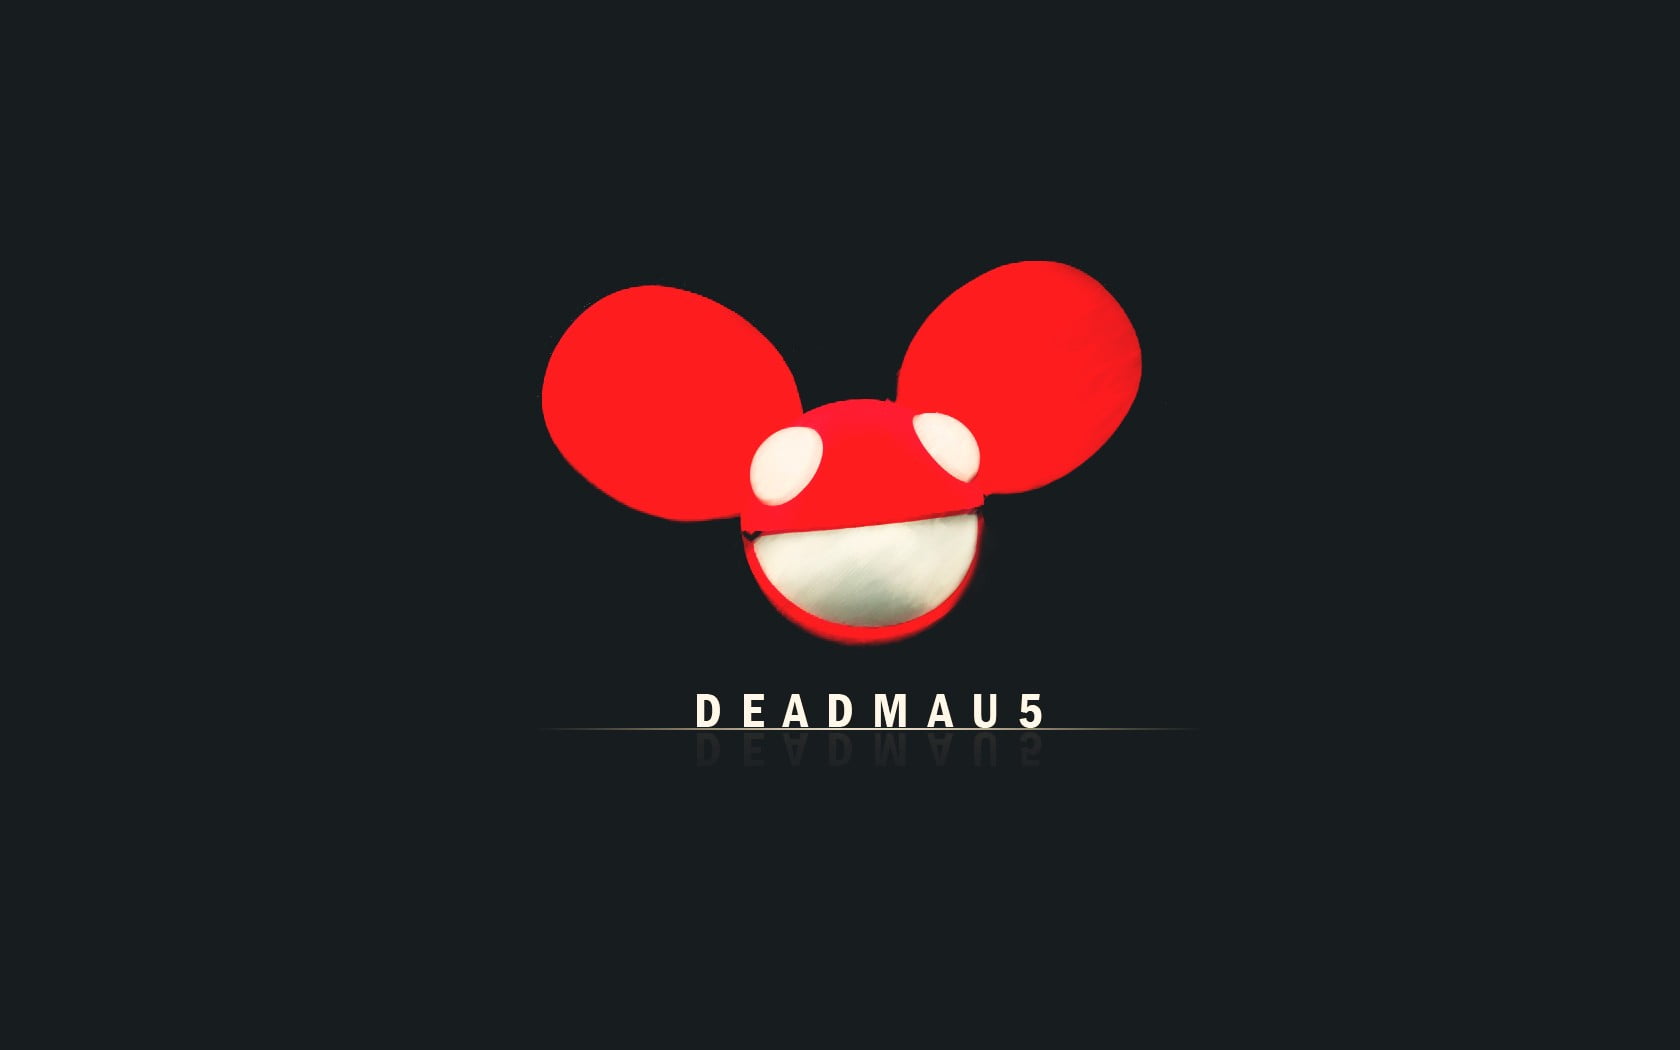 Red and mouse head illustration, minimalism, deadmau5 HD Wallpaper Flare